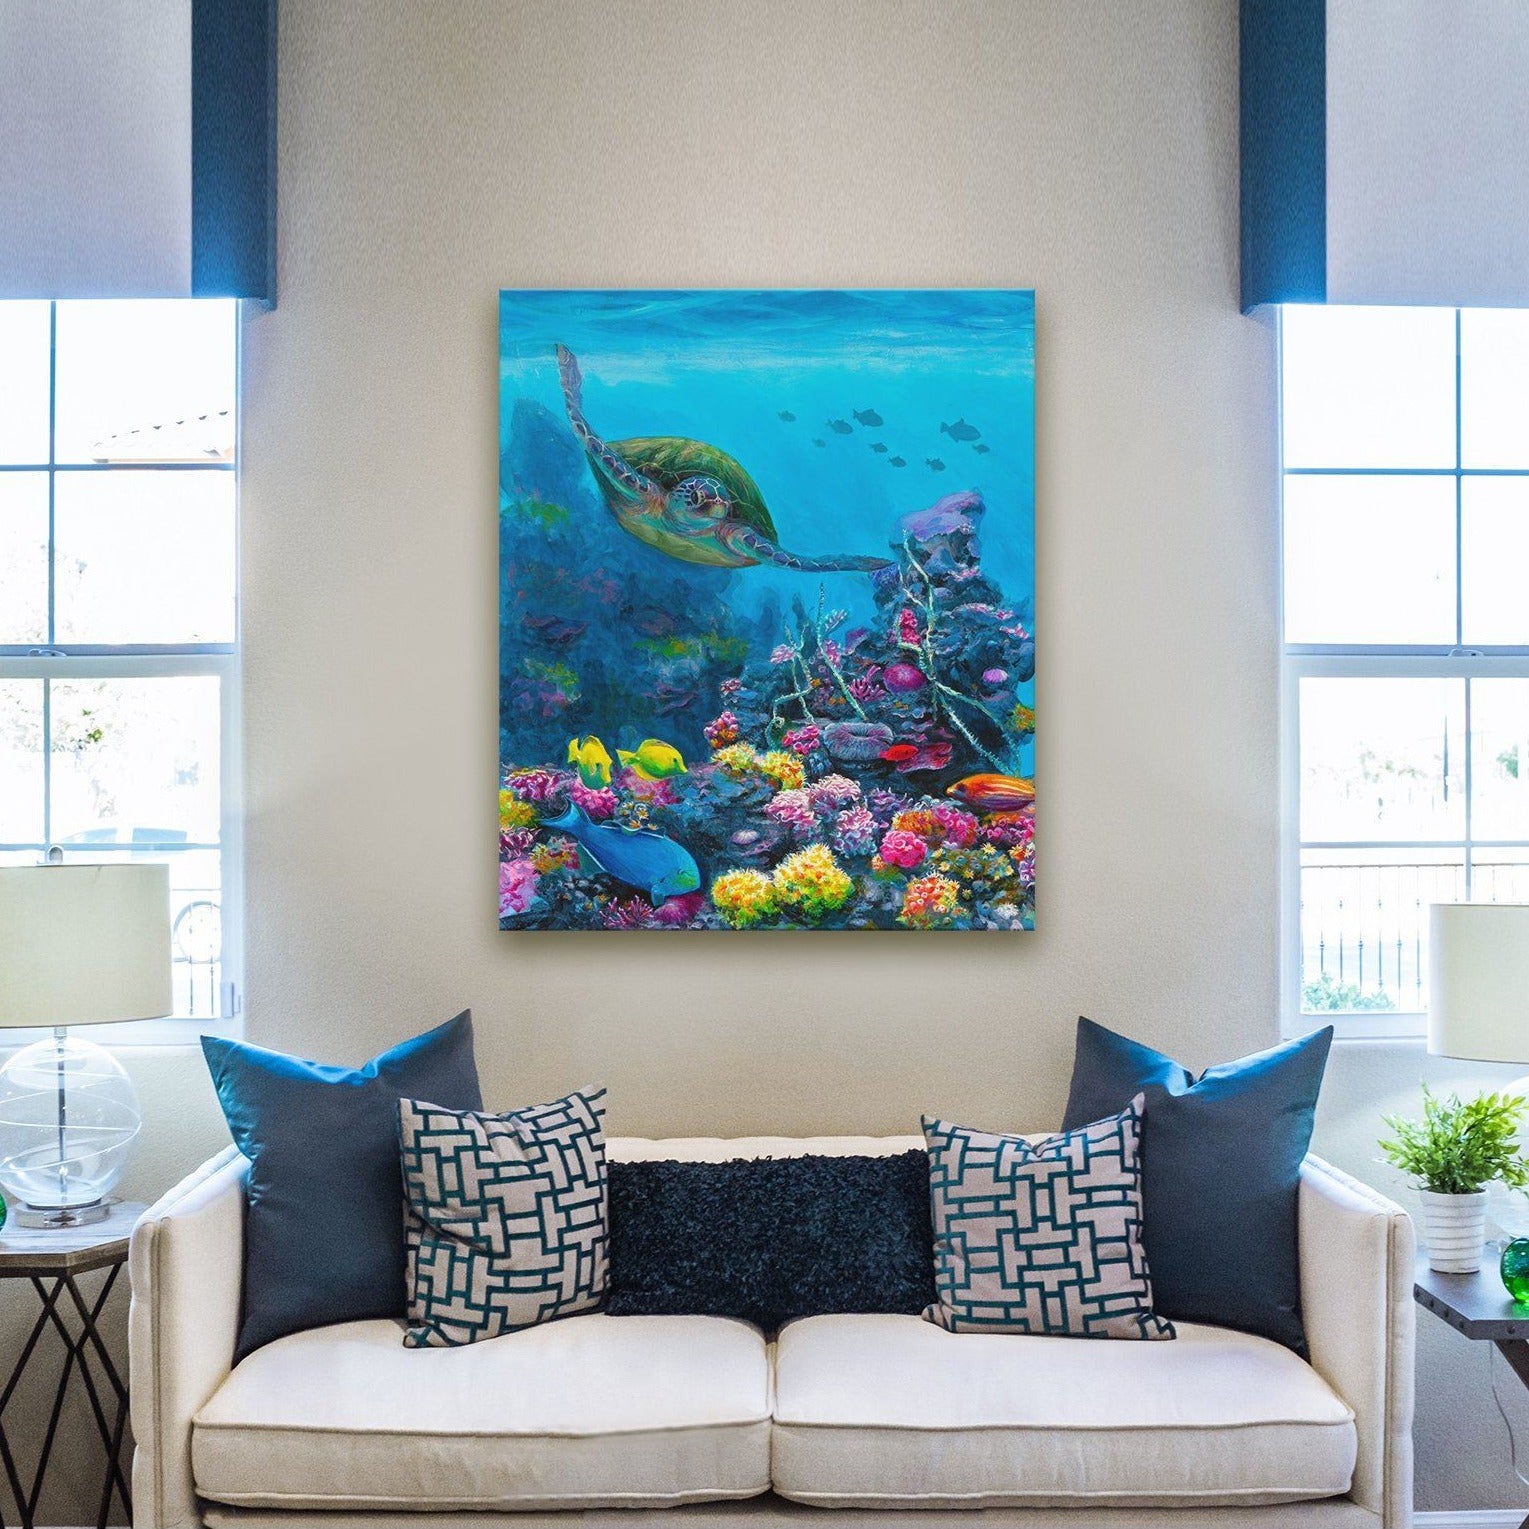 Ocean wall art canvas of green sea turtle swimming through a coral reef with tropical fish hanging on wall above white couch with turquoise blue pillows